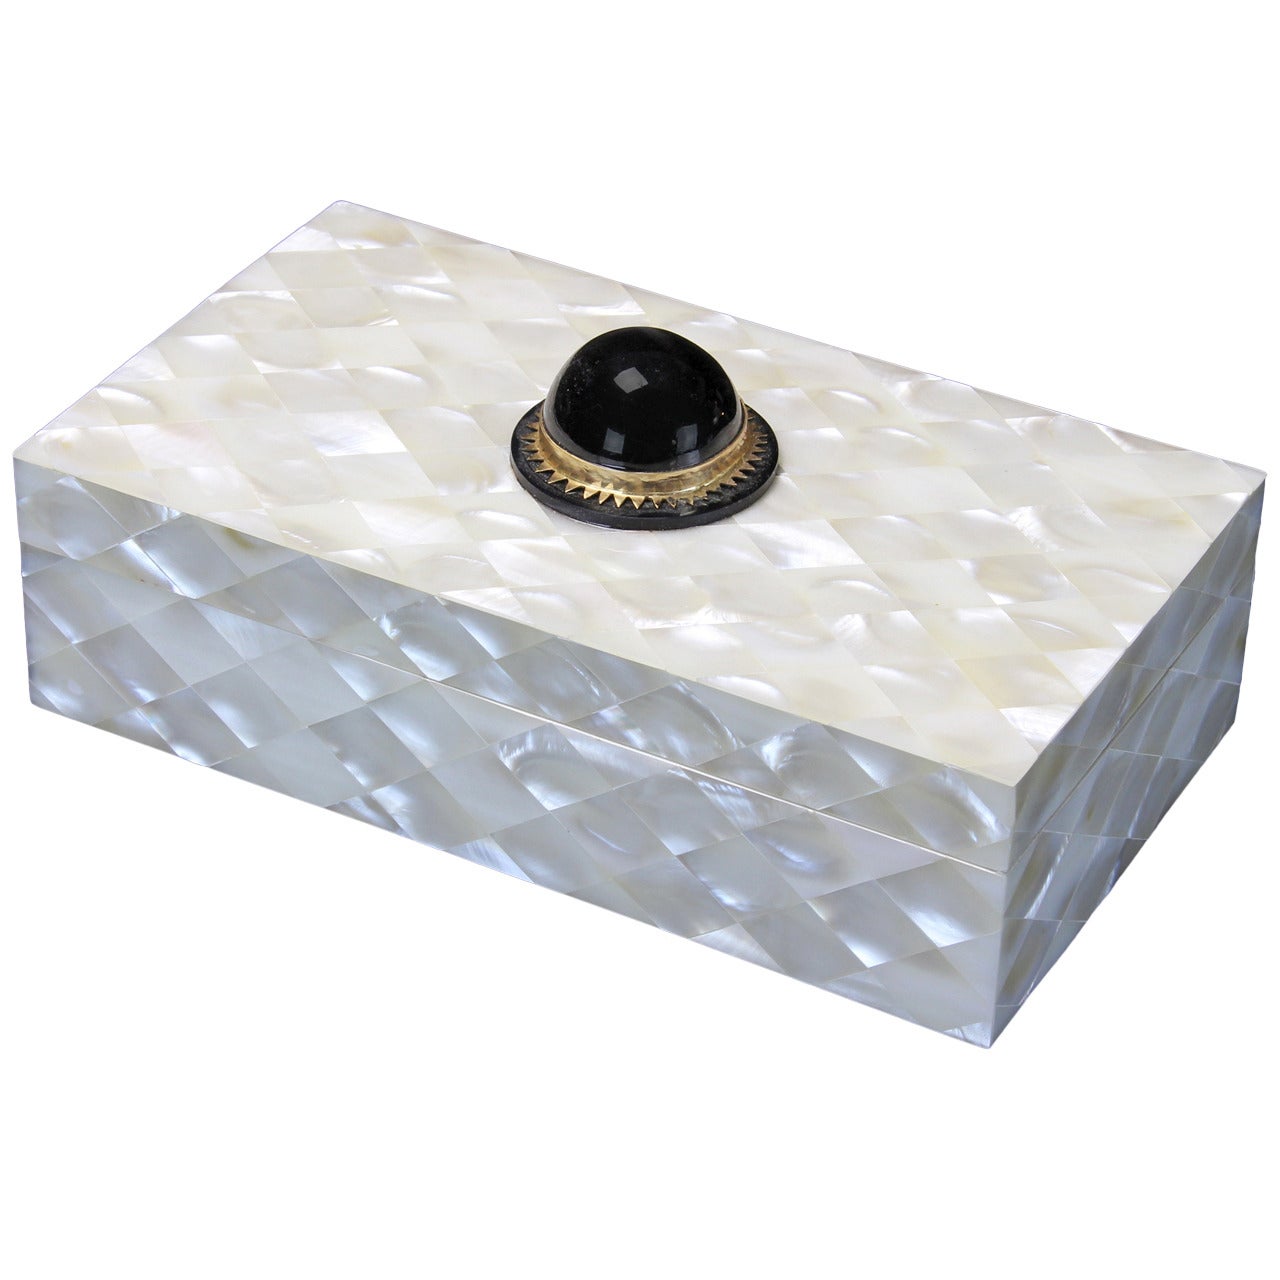 Mother-of-Pearl Box with Black Cabochon